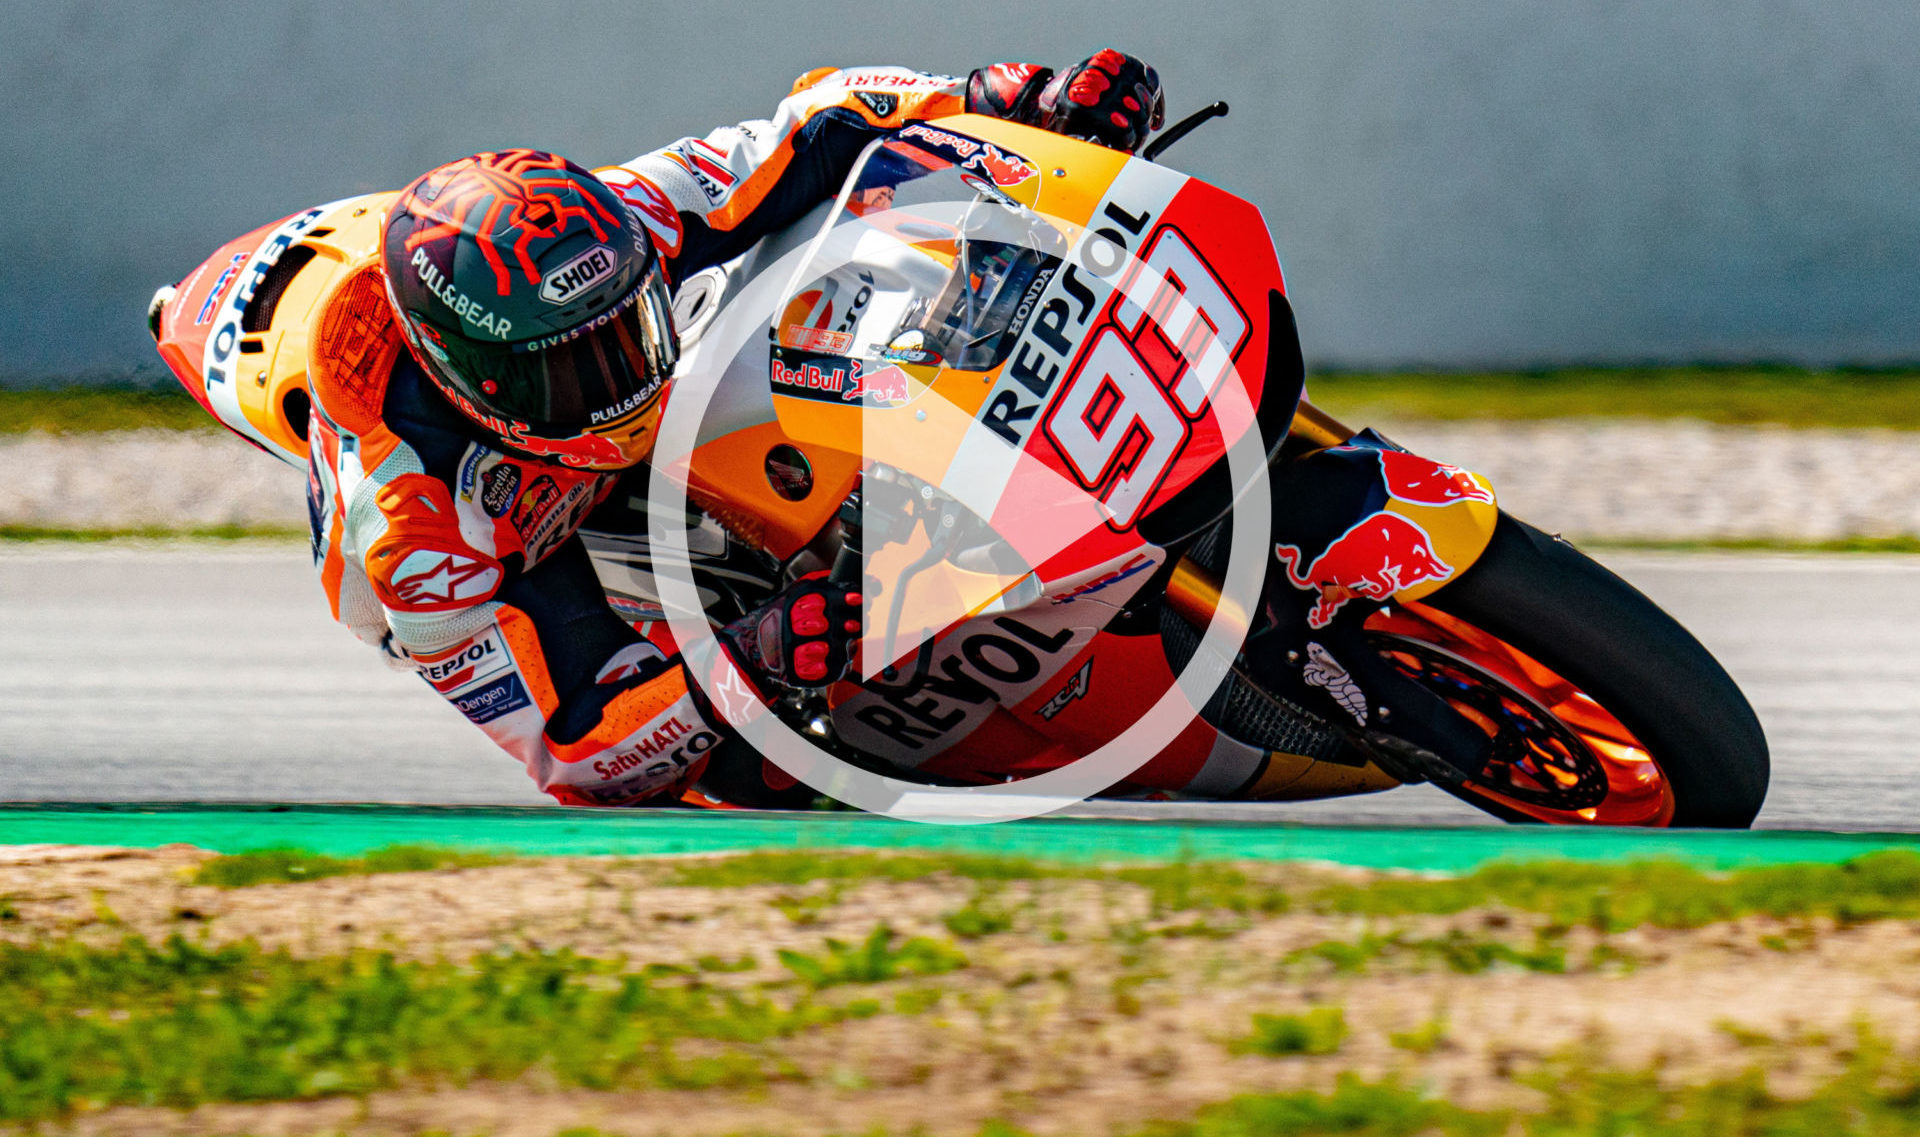 Watch as Marc Marquez rides again on the racetrack for the first time in eight months. Photo courtesy Repsol Honda.